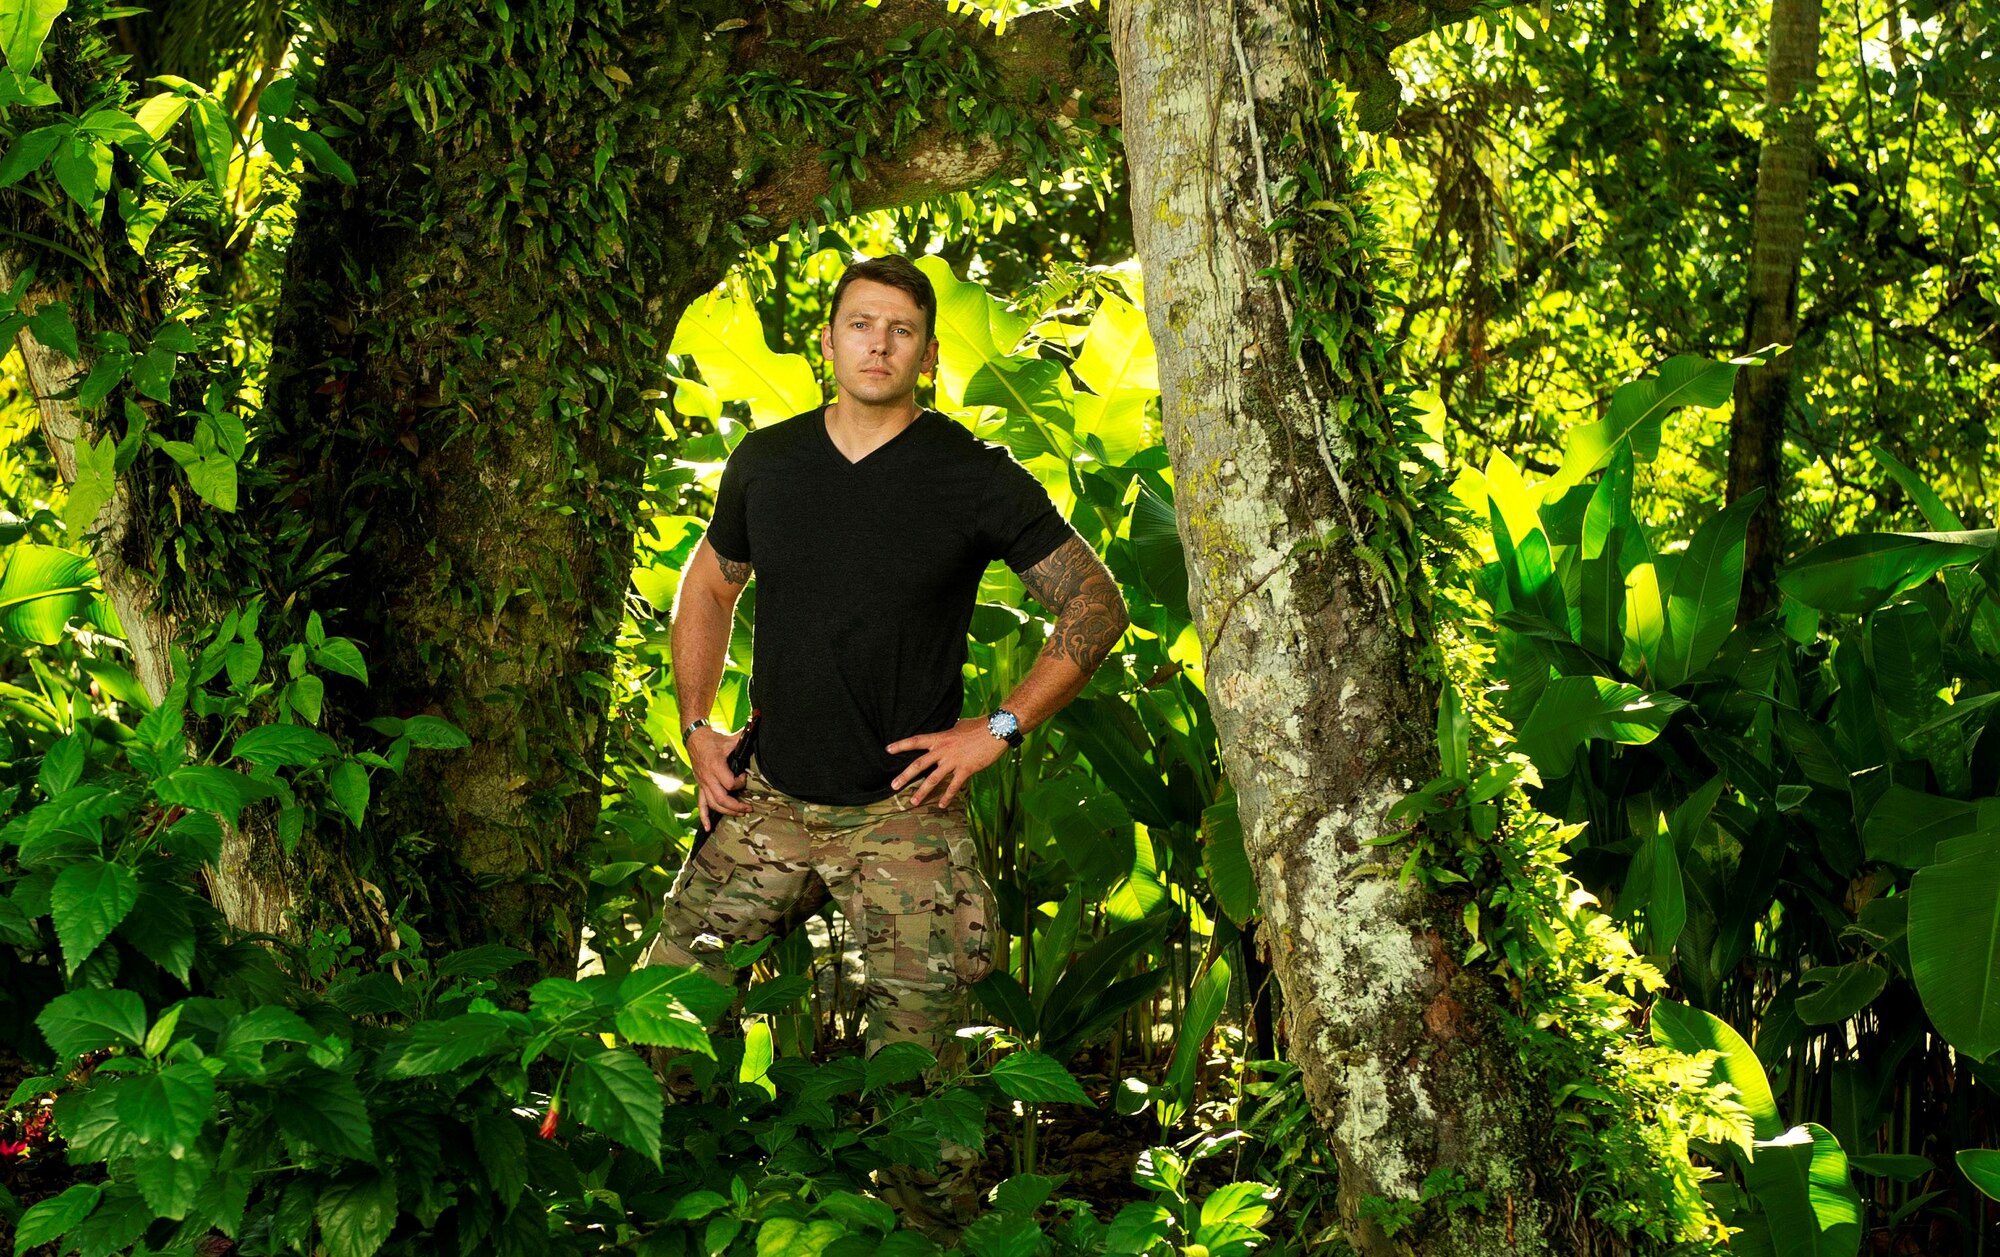 Tech. Sgt. Ben Domian, a survival, evasion, resistance, and escape specialist with the 920th Rescue Wing, stars in a new reality show, "Kicking and Screaming," set to air March 9 at 8 p.m. Central Standard Time on FOX network. The competition series teams 10 expert survivalists with pampered novices in a tropical jungle in Fiji to battle it out for a chance to win $500,000. (Photo by Jeff Neira courtesy of FOX Broadcasting company.)
